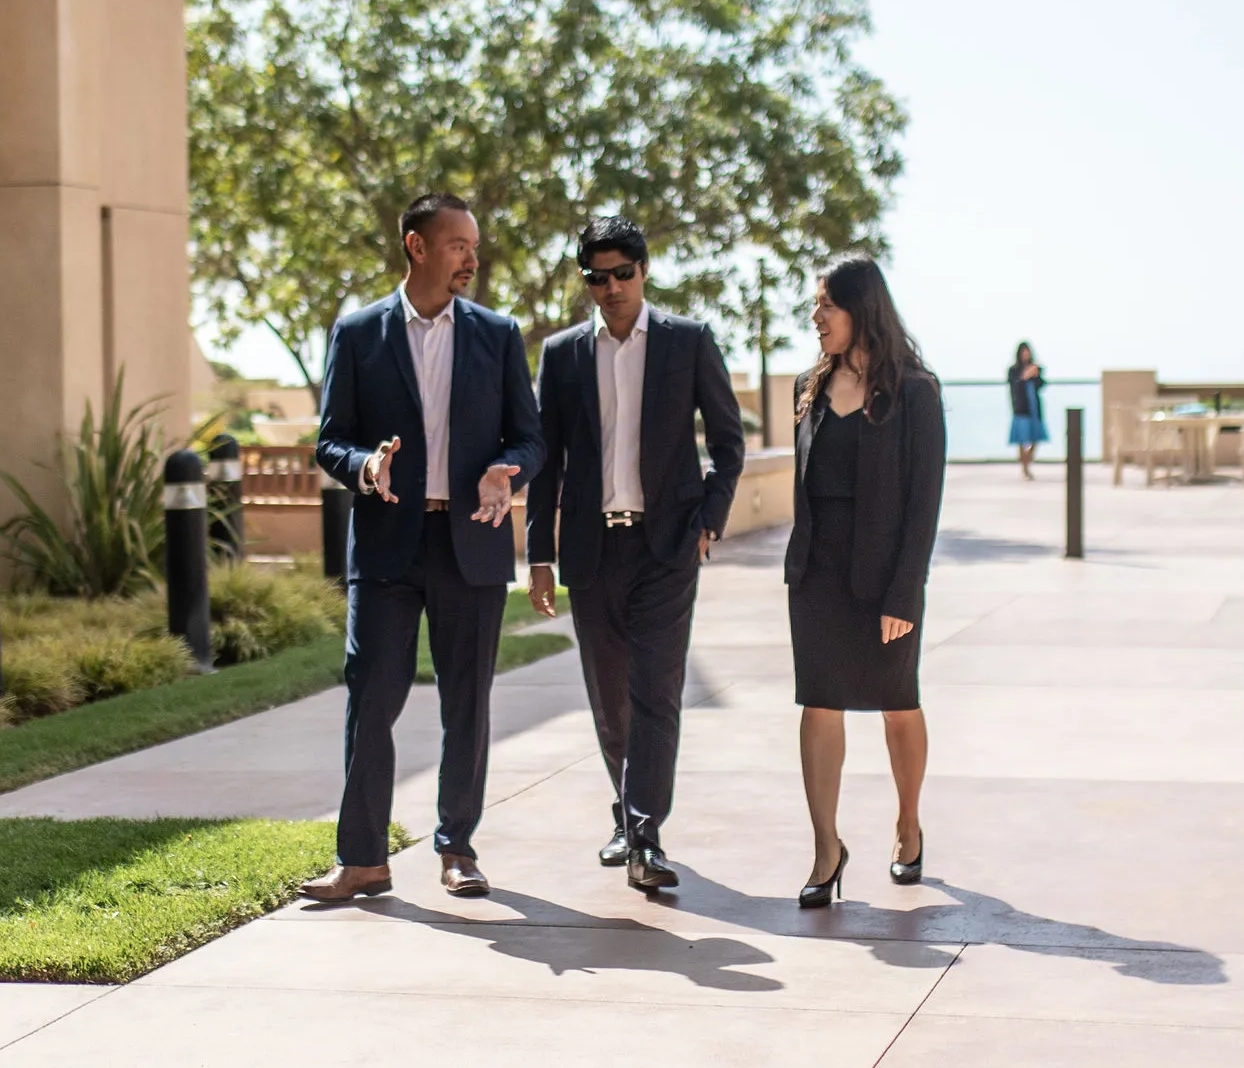 Three Pepperdine MBA colleagues meet outside an office building.